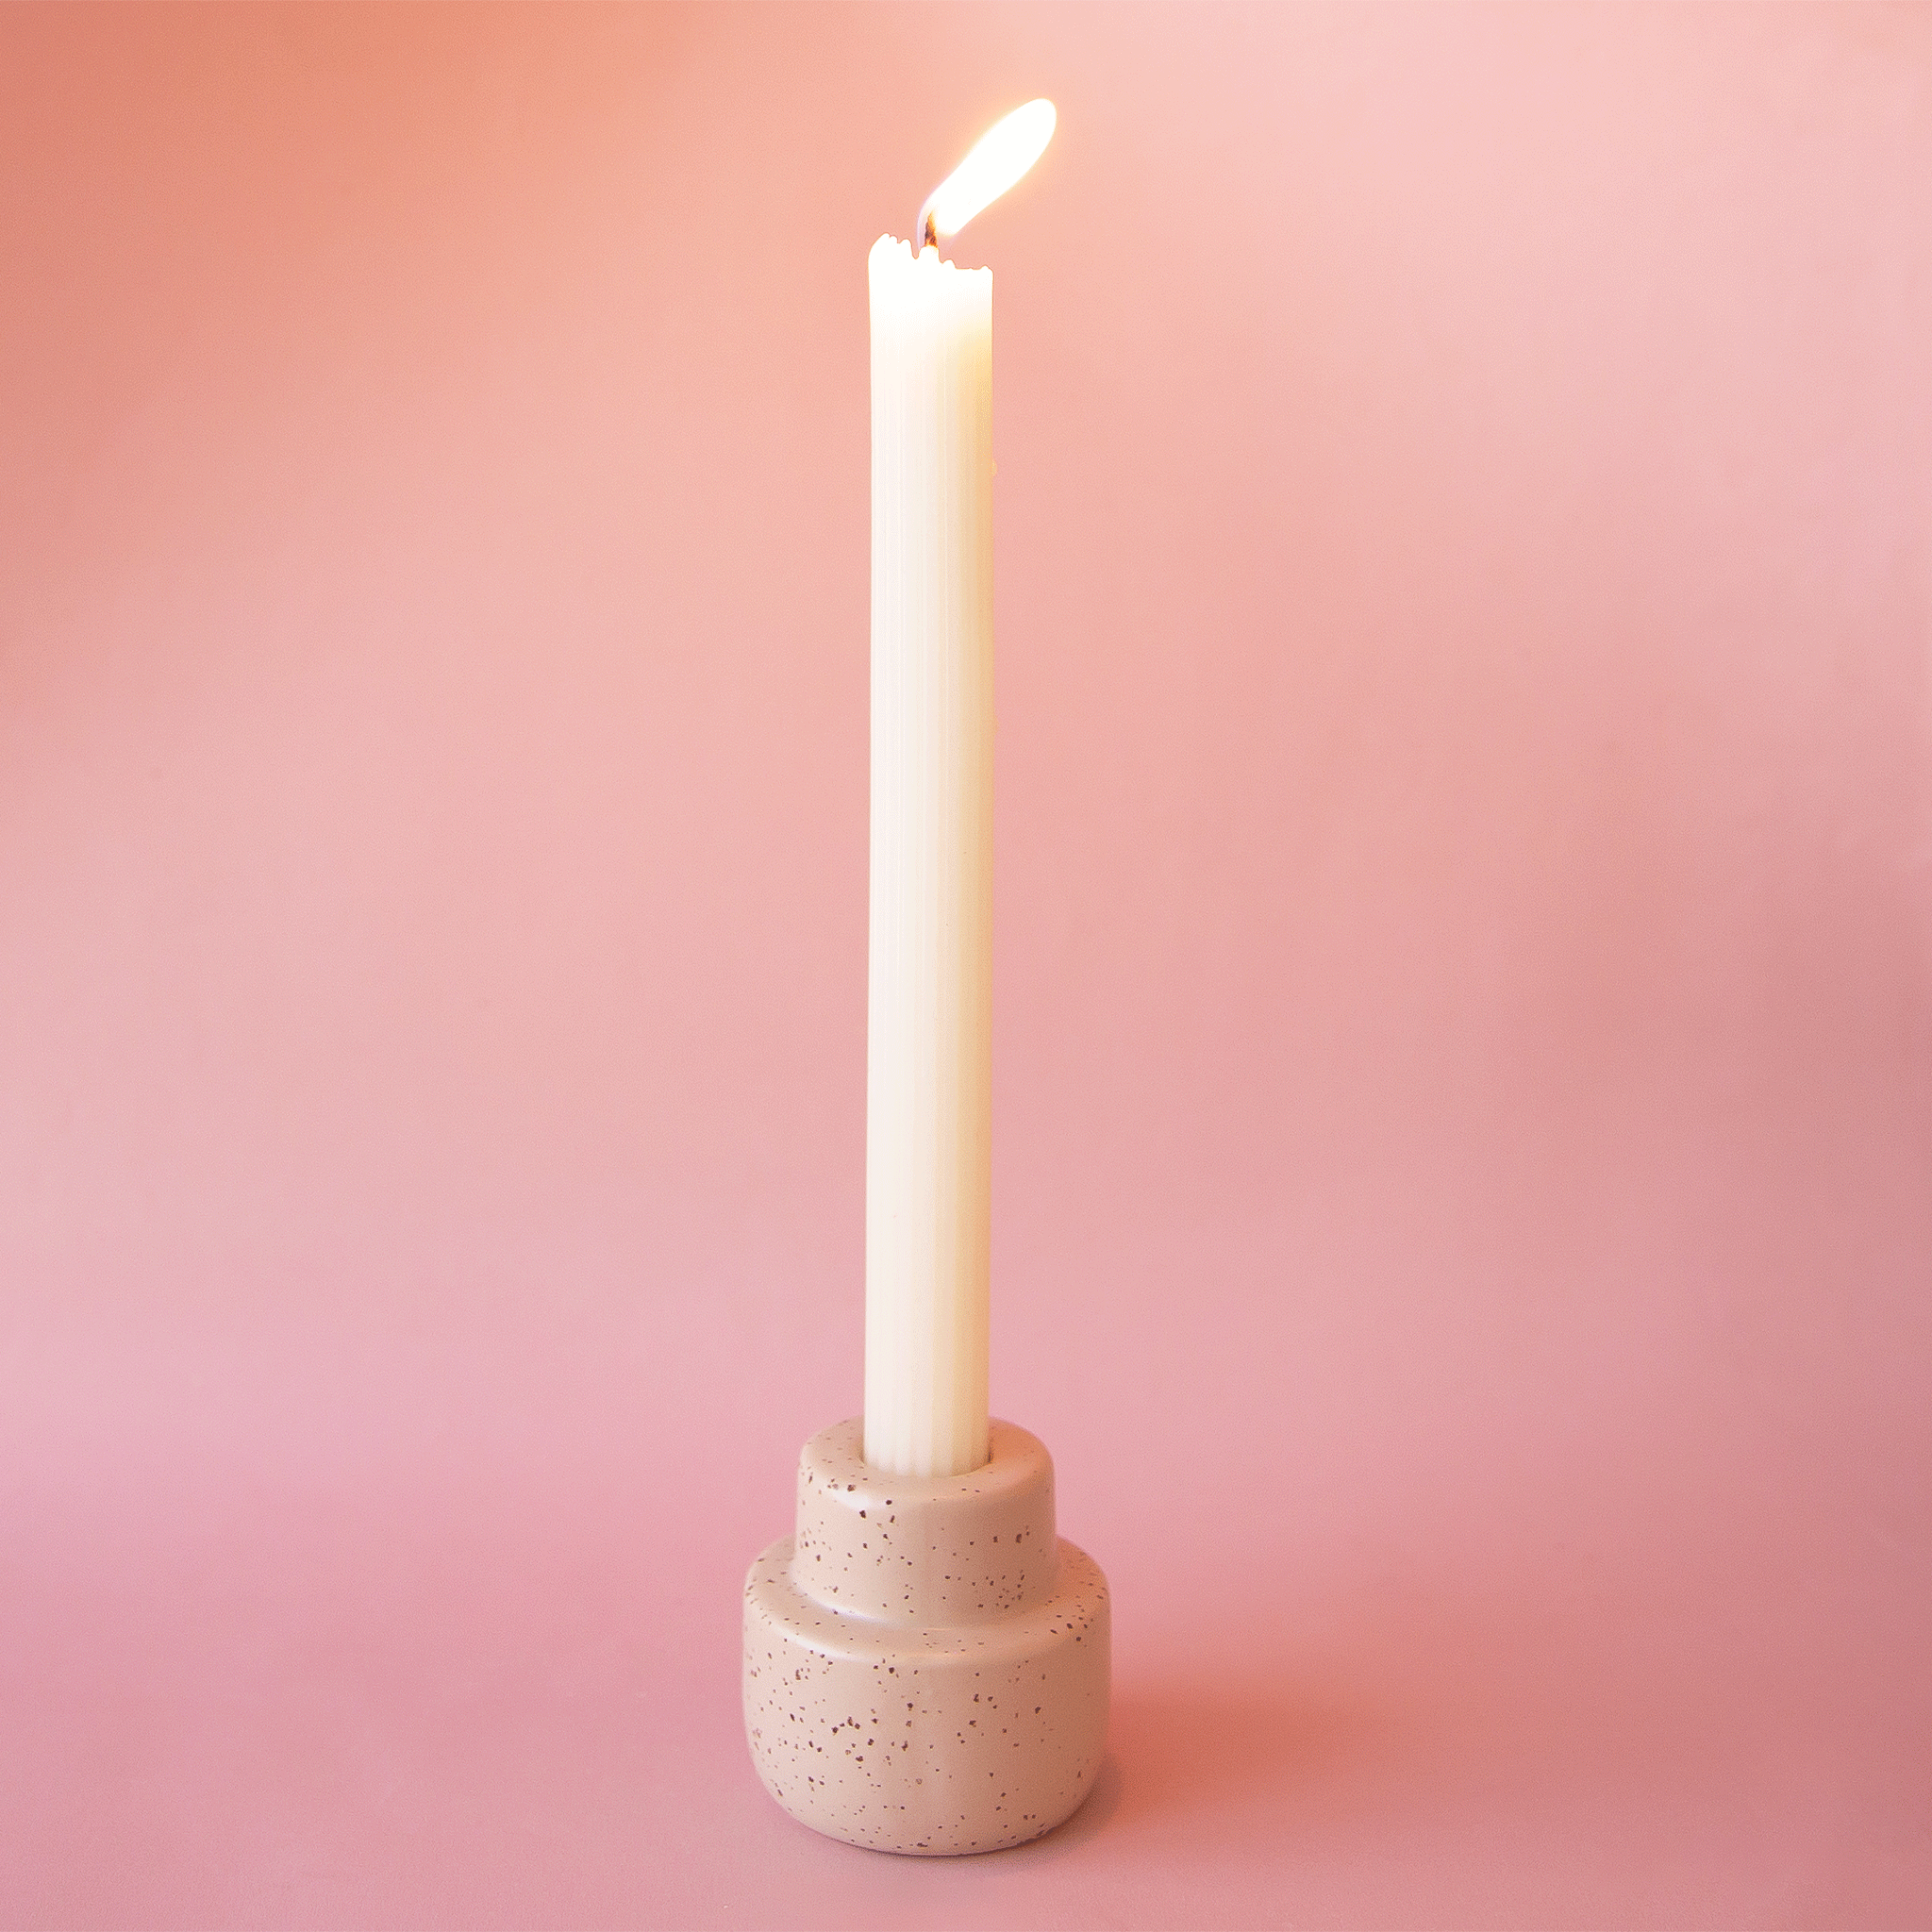 The peach colored ceramic candleholder with a taper candle in the center.